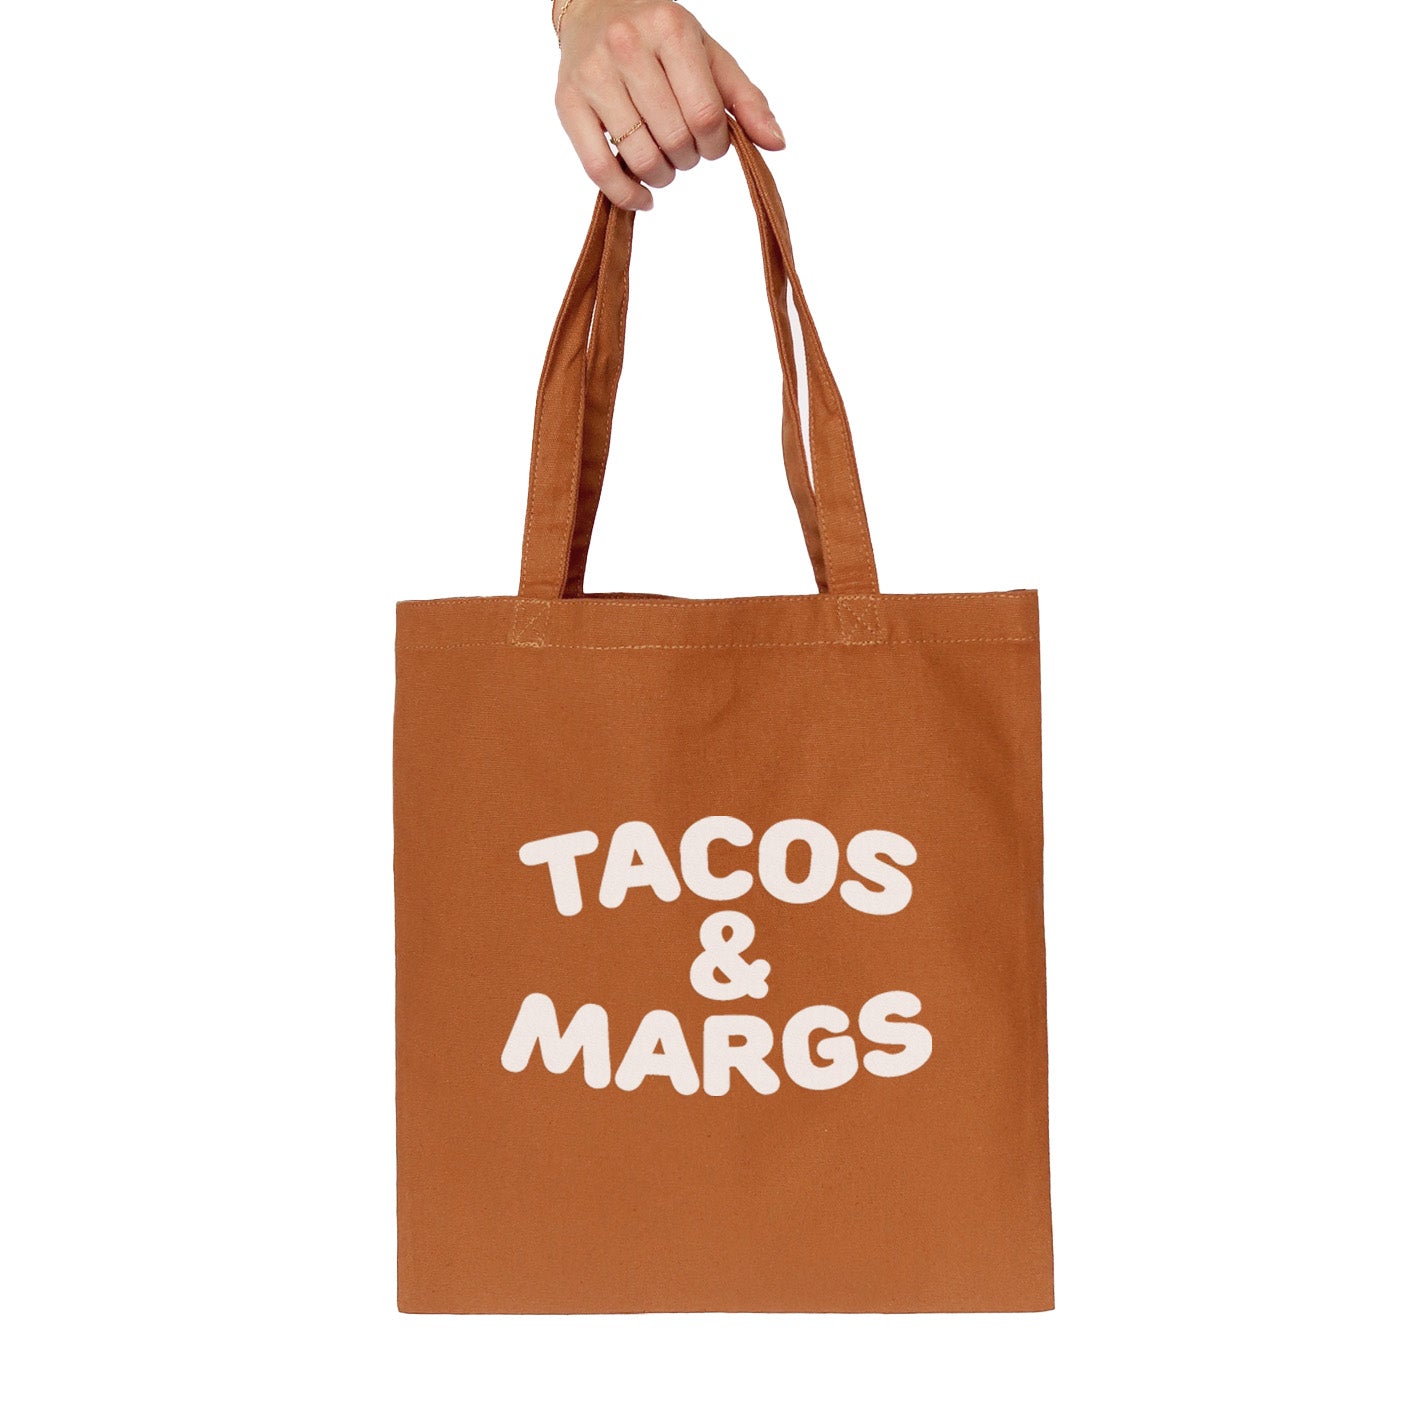 Tacos & Margs Tote Bag